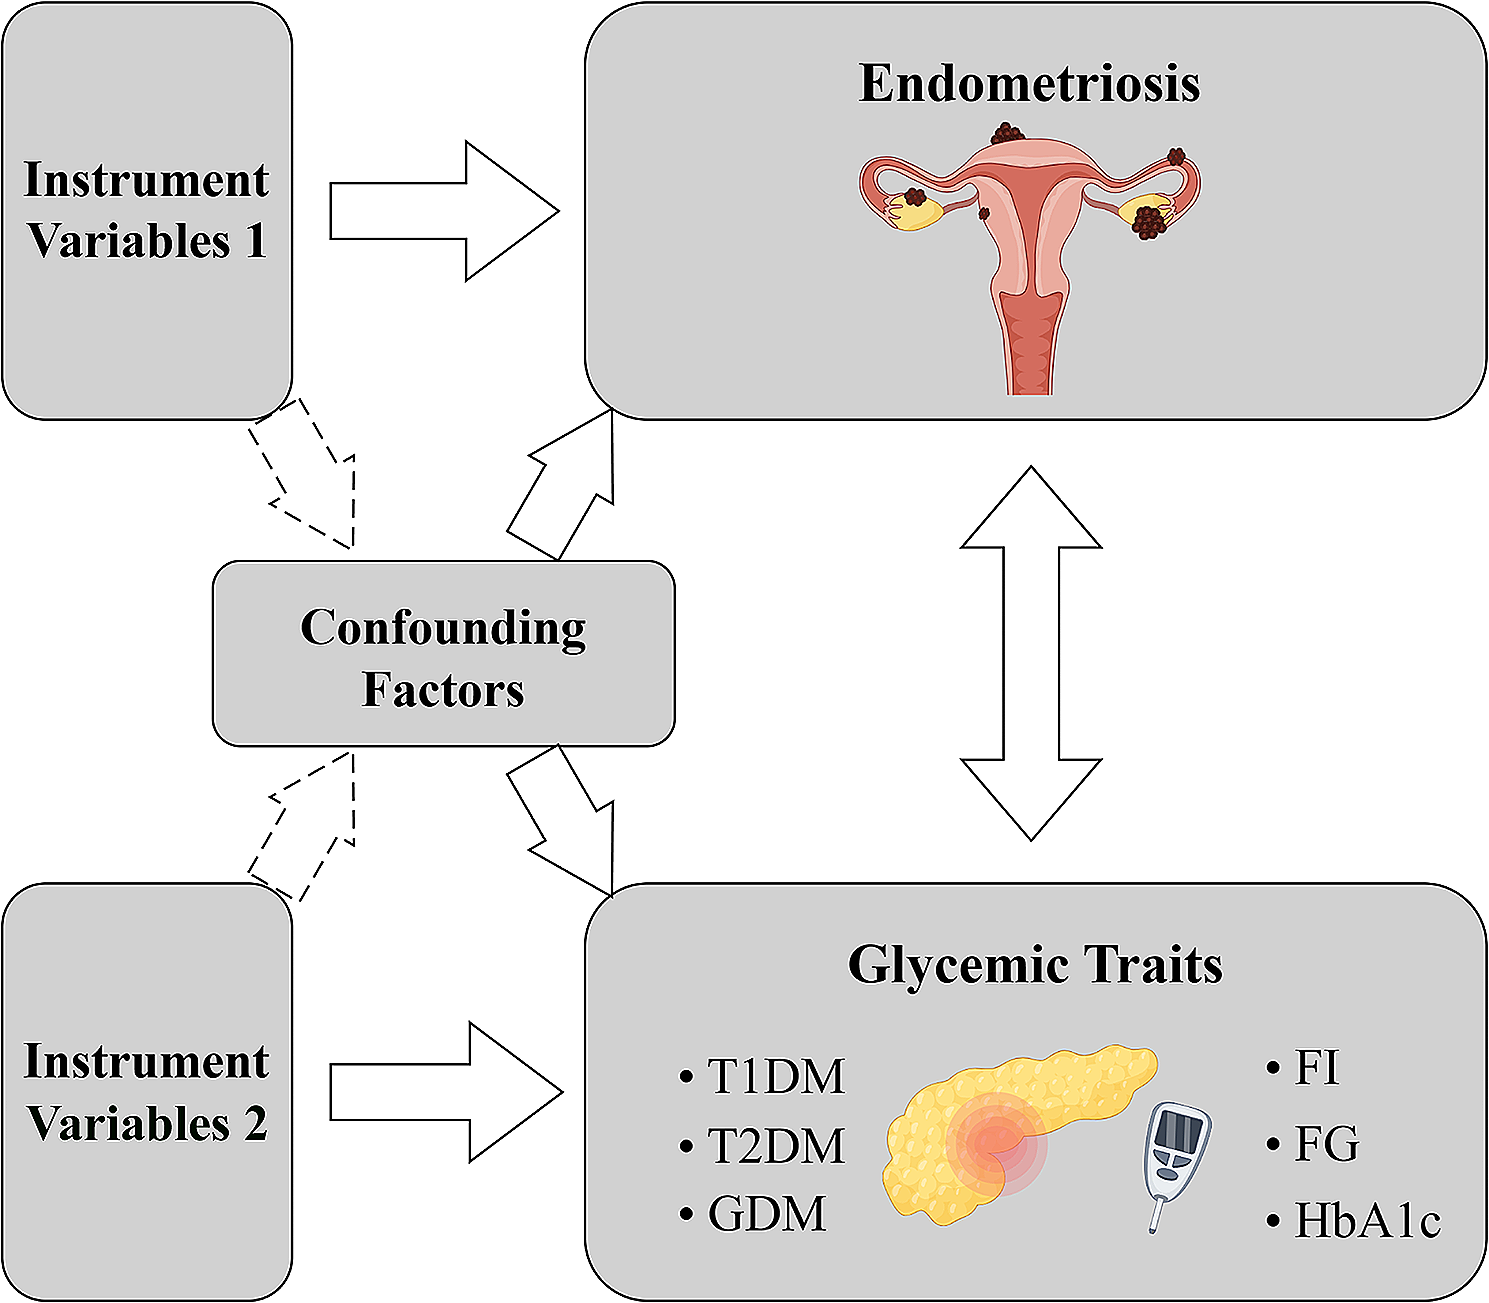 Causal effects of glycemic traits and endometriosis: a bidirectional and multivariate mendelian randomization study